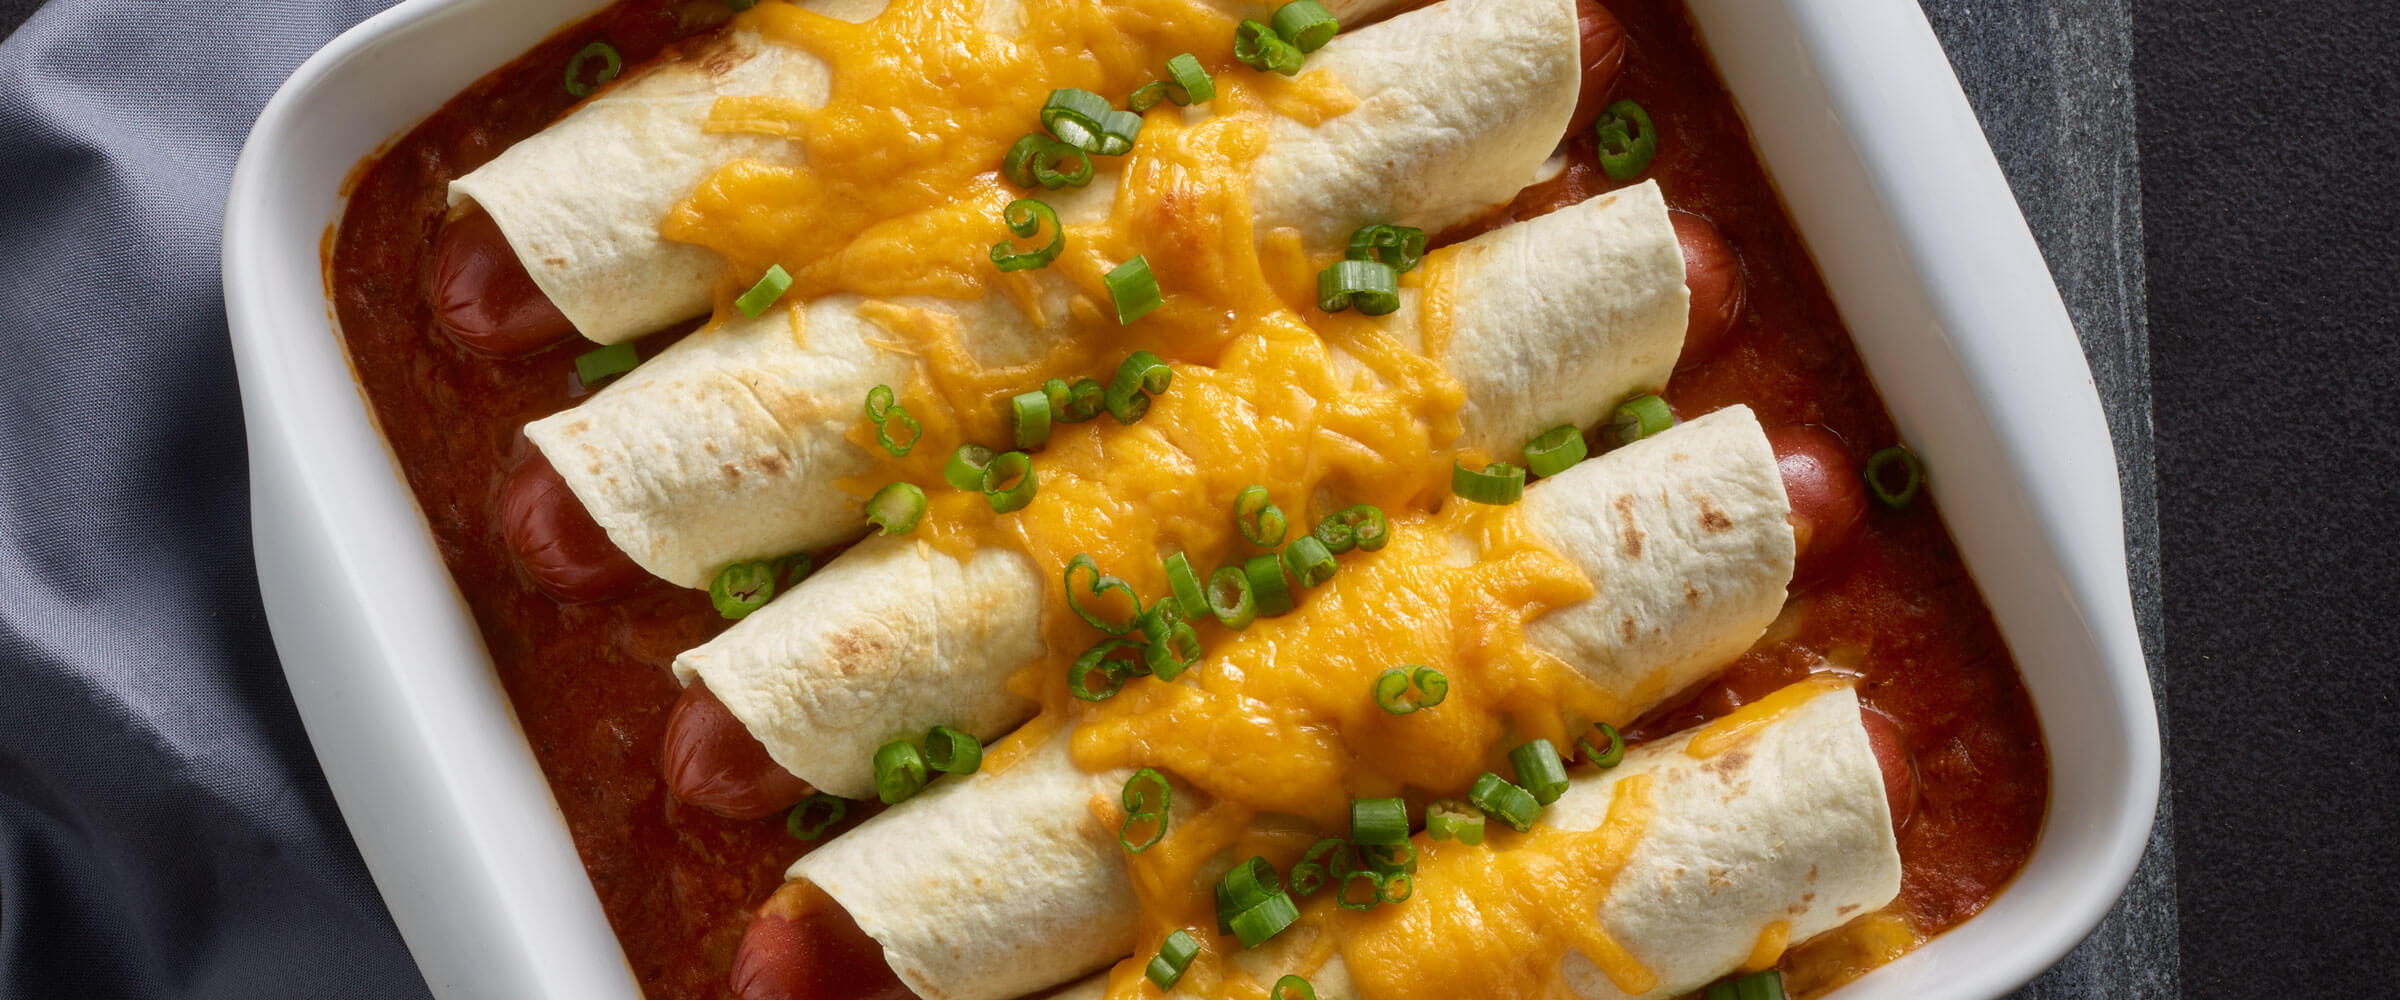 Cheesy Coney Island Chili Dog Bake in white dish topped with cheese and green onions